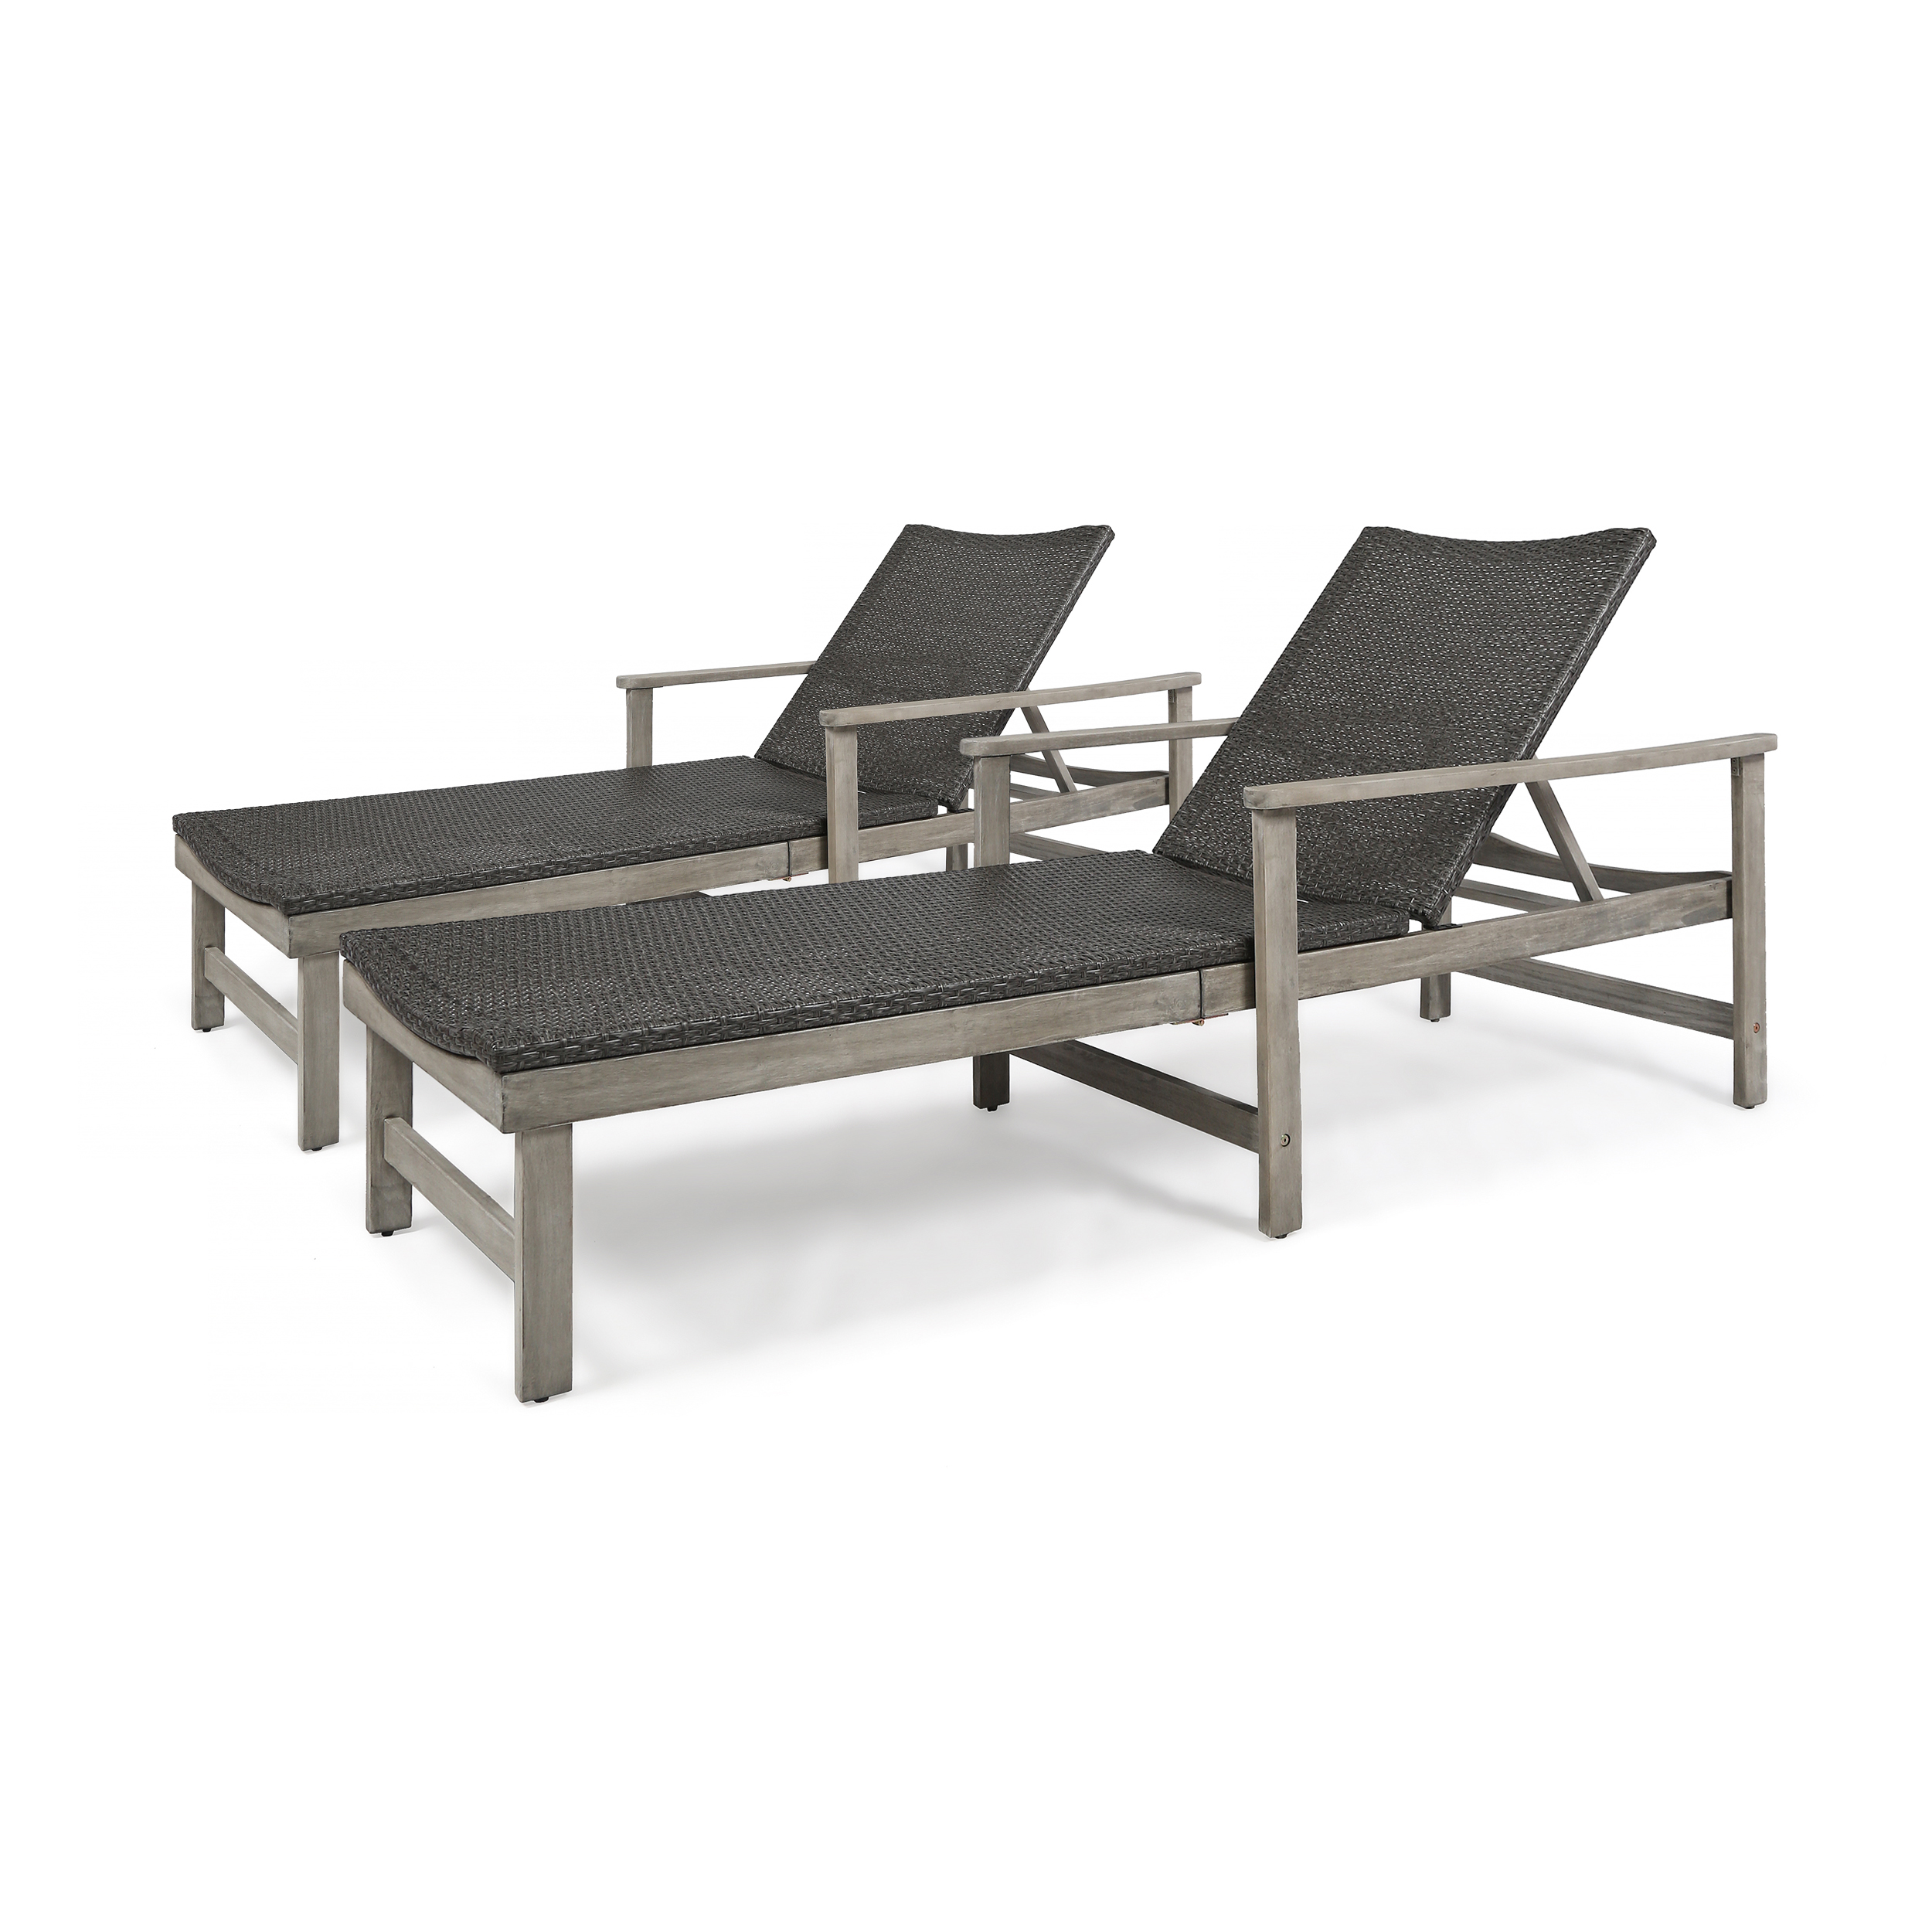 Camdyn Outdoor Rustic Acacia Wood Chaise Lounge with Wicker Seating (Set of 2), Light Gray and Mixed Black - image 2 of 7